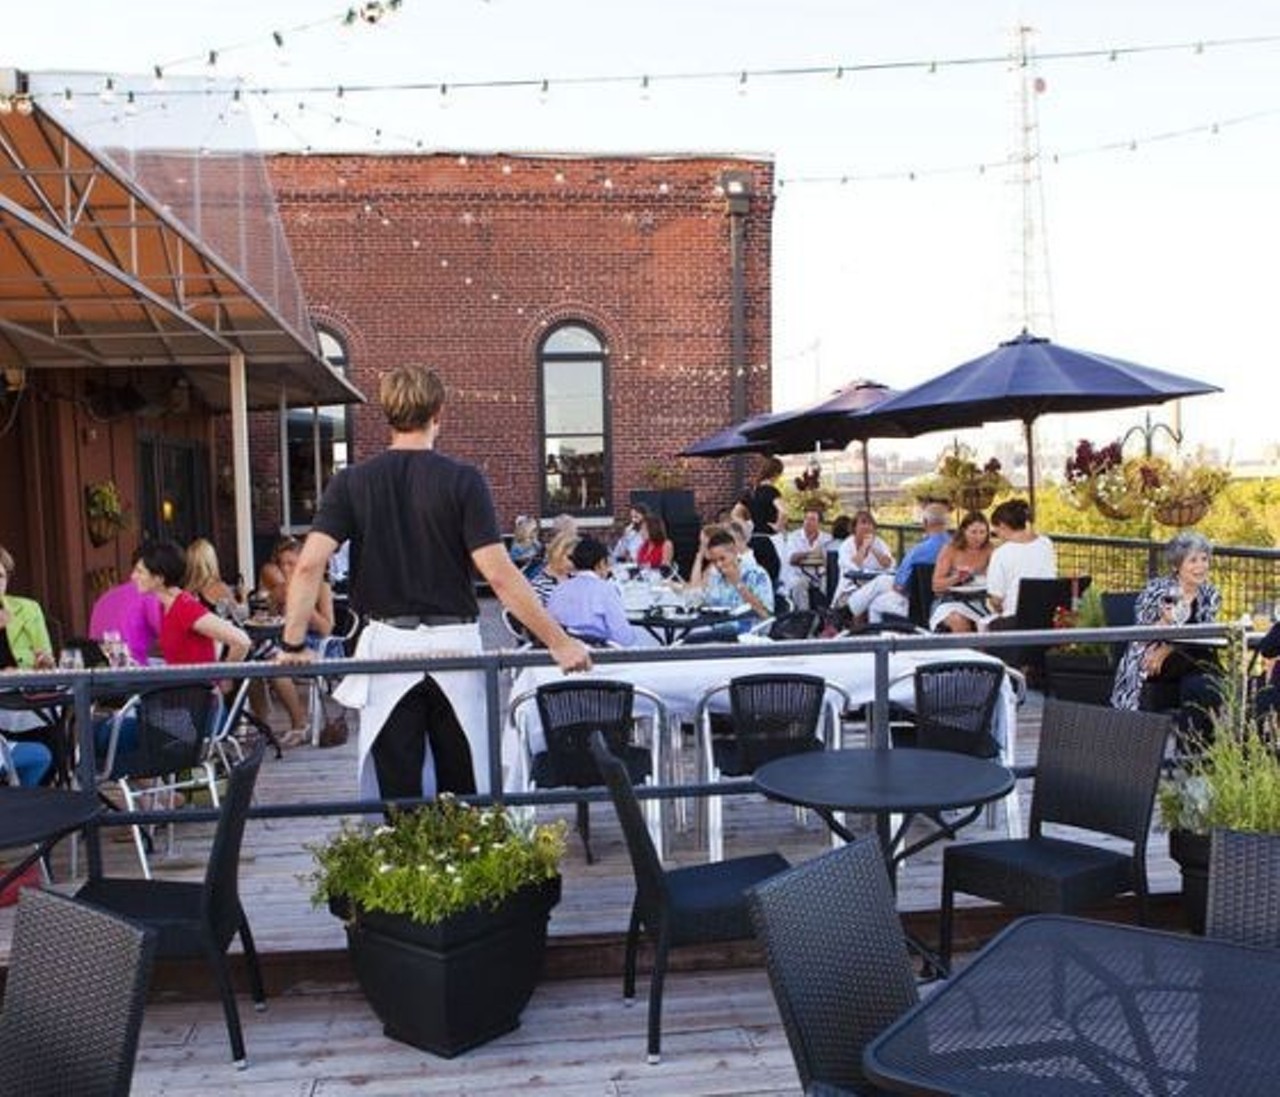 The parking lot at Vin de Set is mobbed by brunch eaters, ready to storm the roof. 
Photo credit: Laura Miller